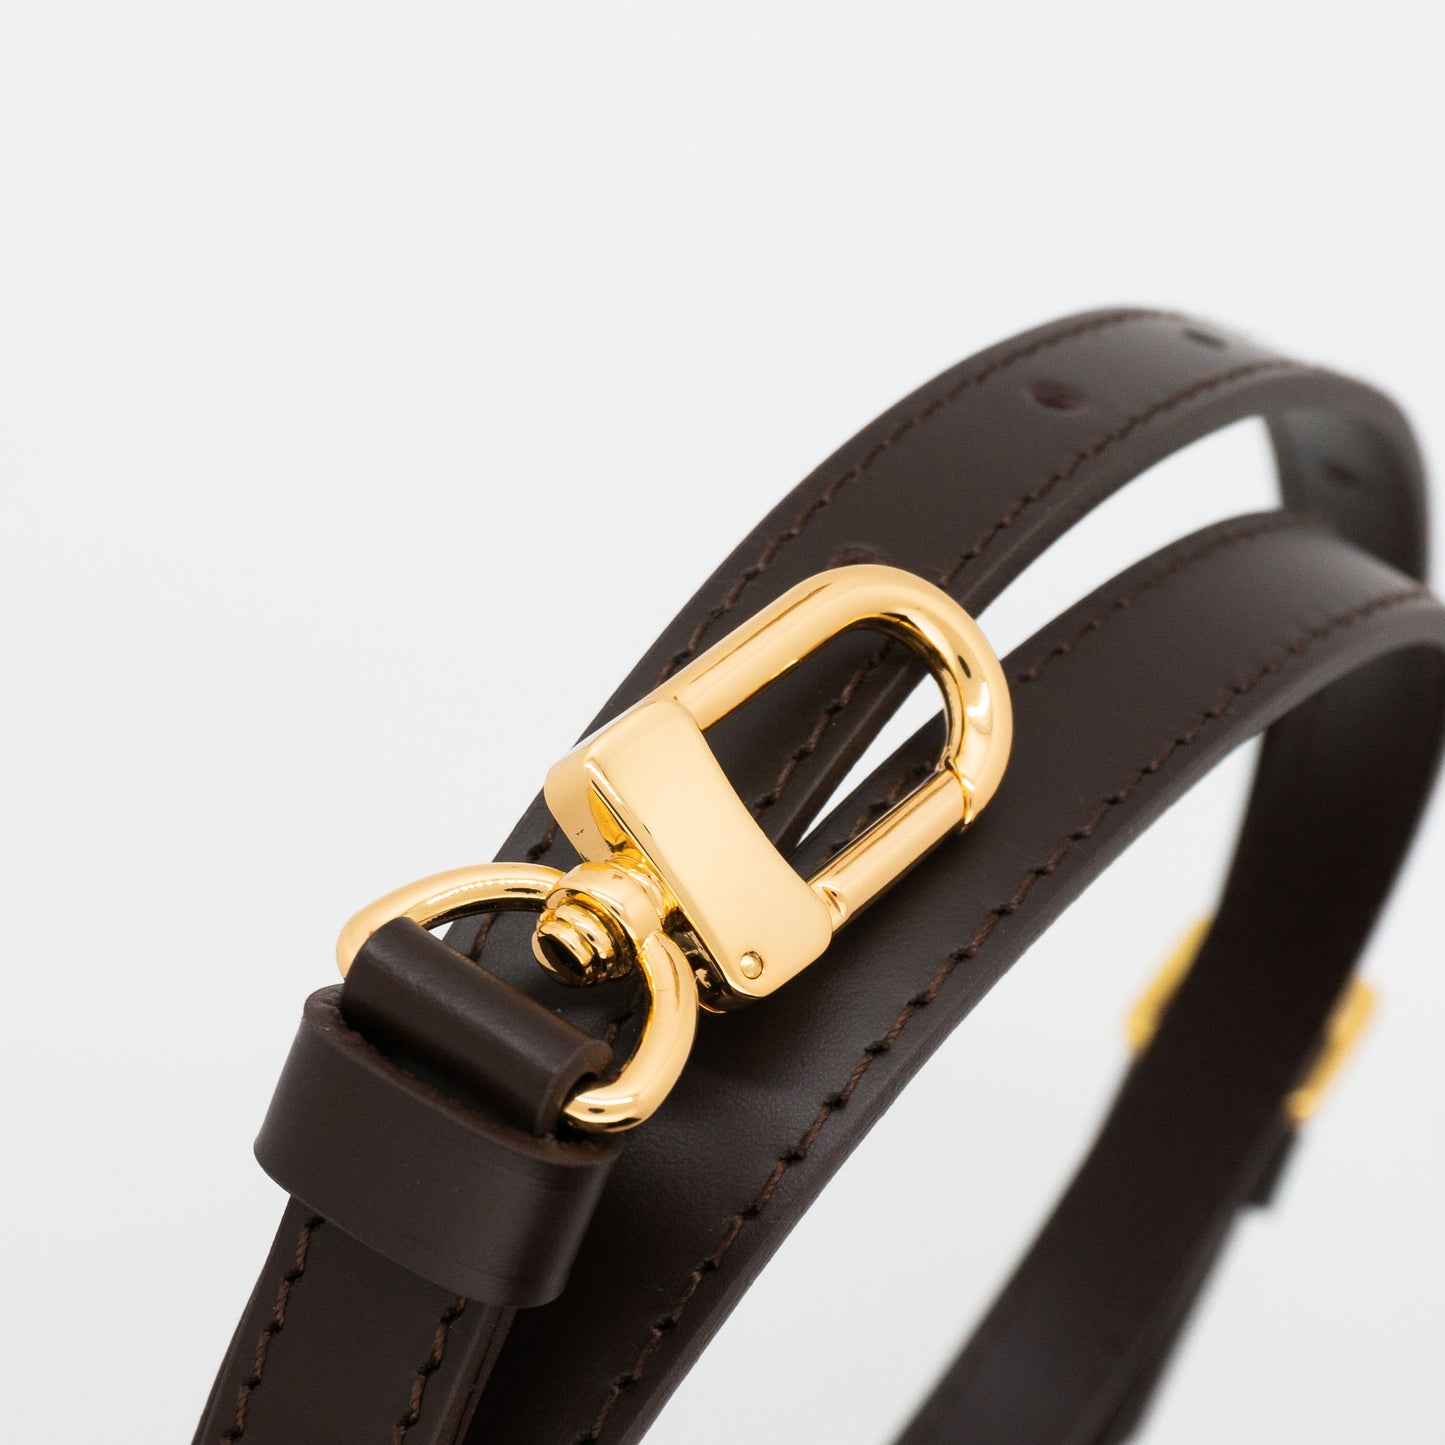 Adjustable Leather Strap in treated leather - 1.45cm wide